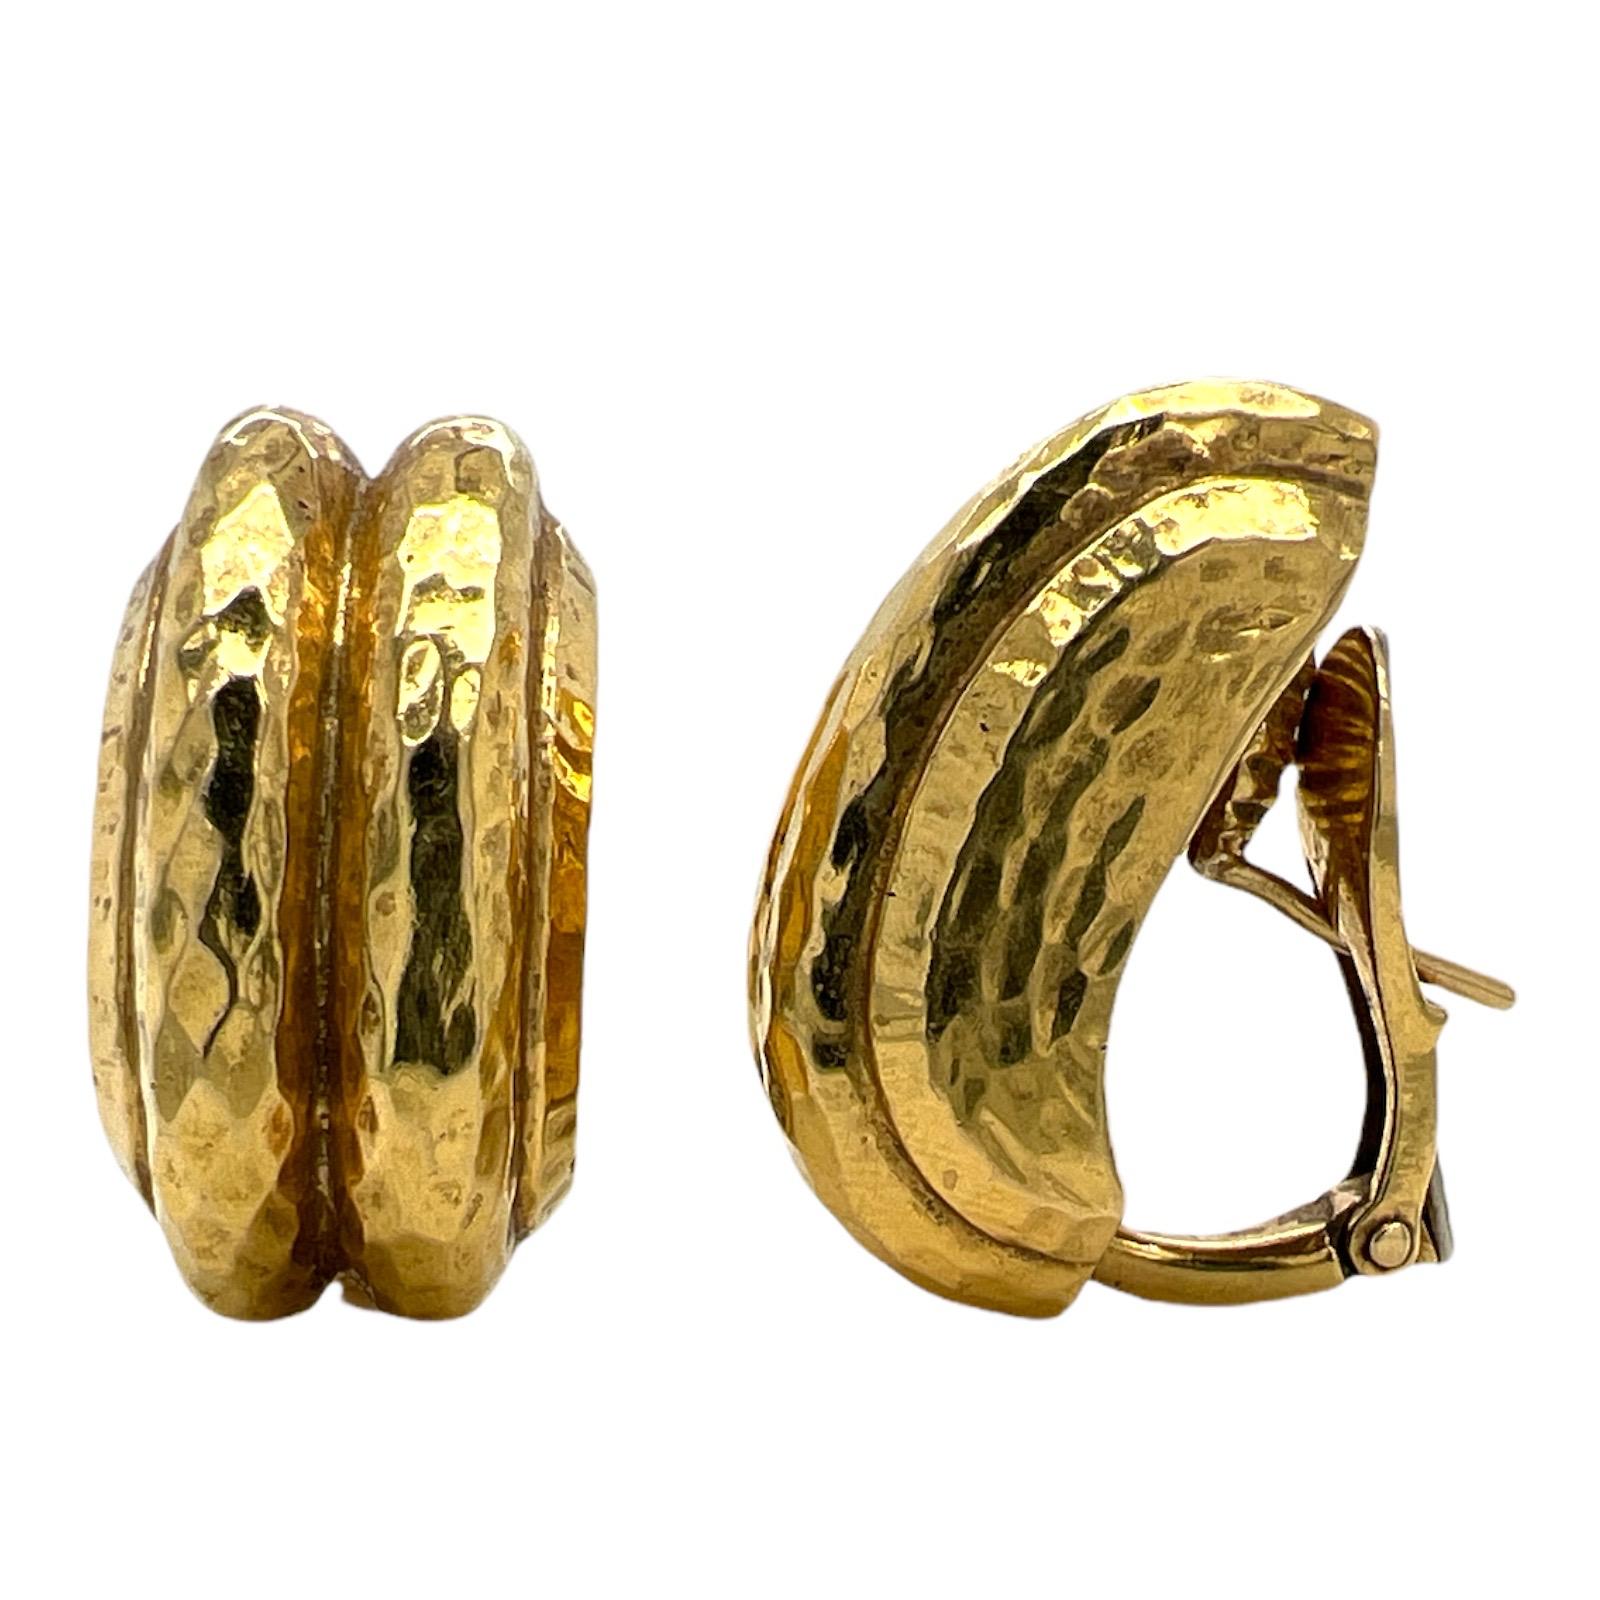 Authentic David Webb Half Hoop Earrings fashioned in 18 karat yellow gold. The earrings feature a hammered finish, lever-back posts, and measure .50 x 1.00 inches. 